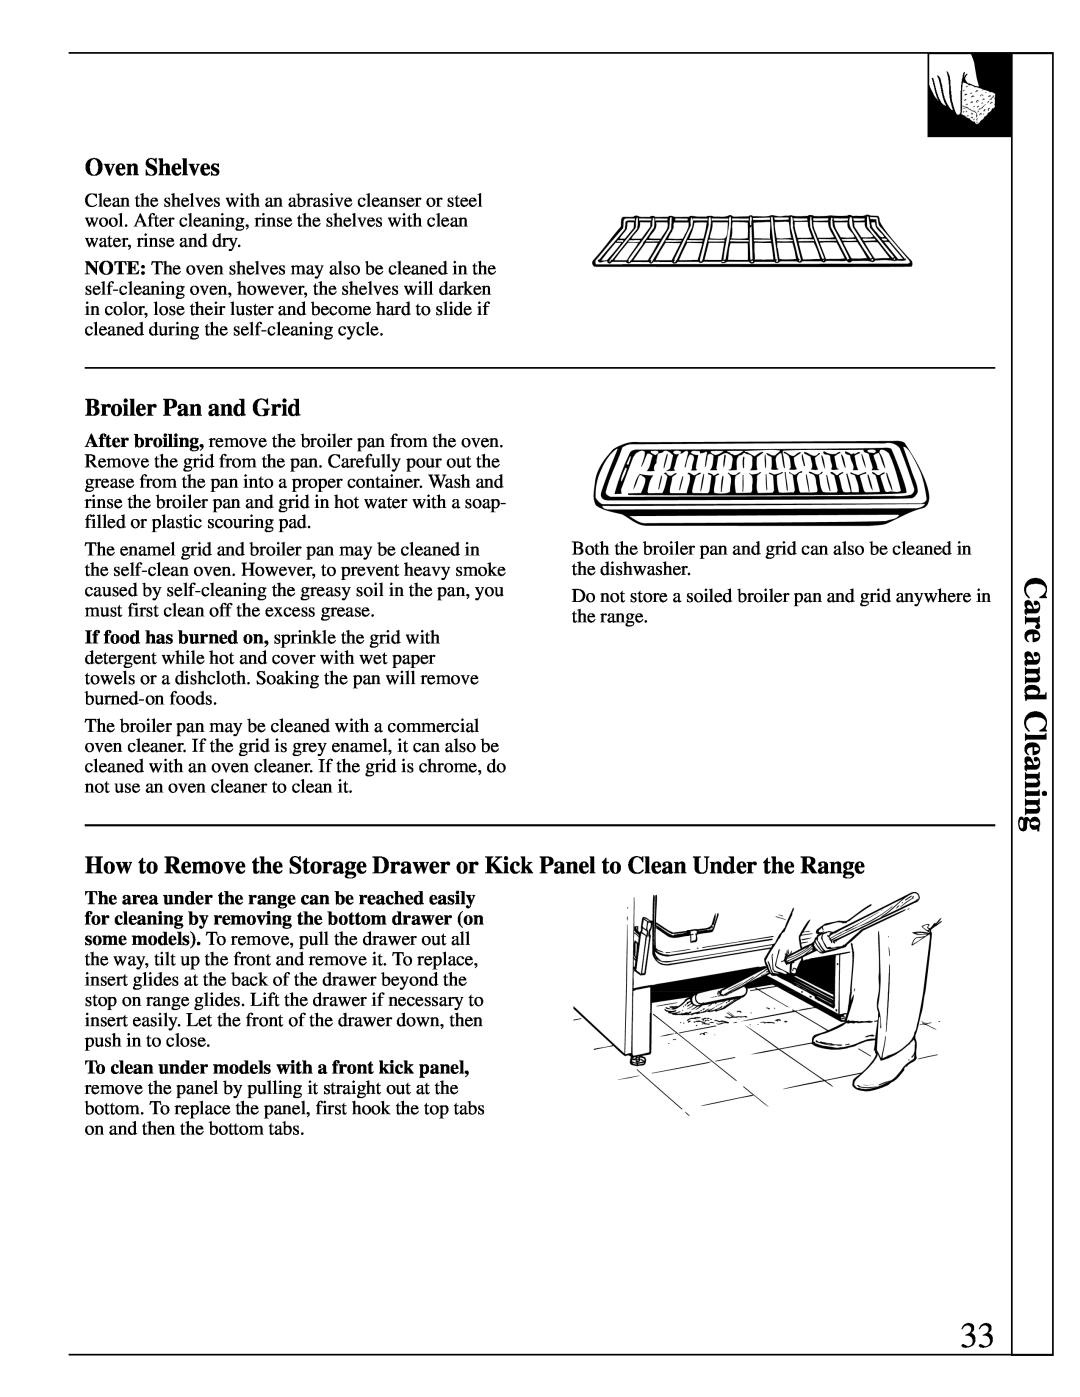 GE 4164D2966P234, 49-8723 warranty Care and Cleaning, Broiler Pan and Grid, Oven Shelves 